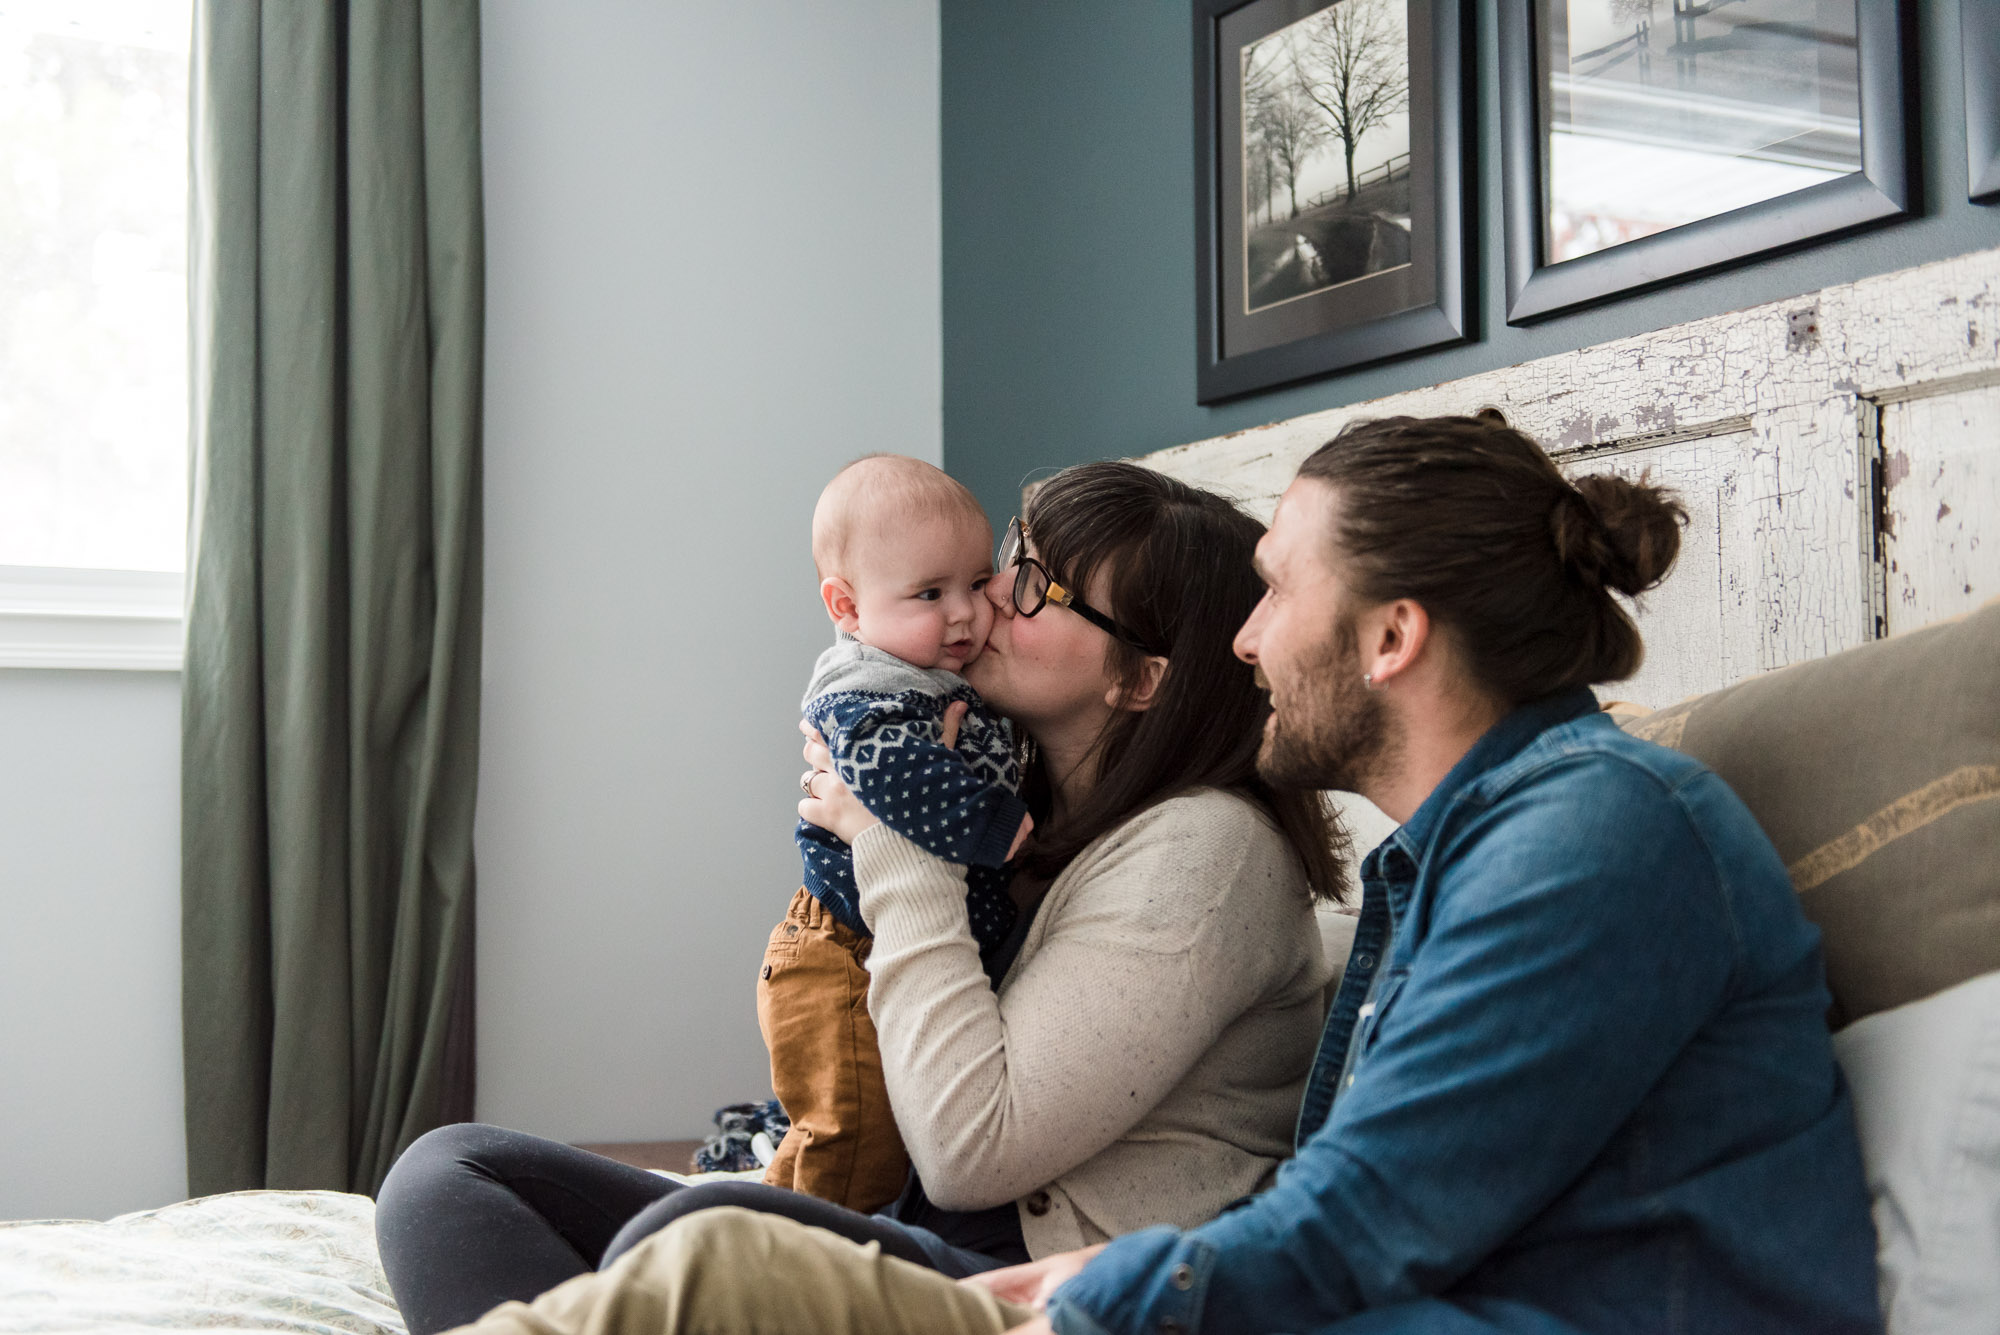 A mom kisses her baby son while dad looks on